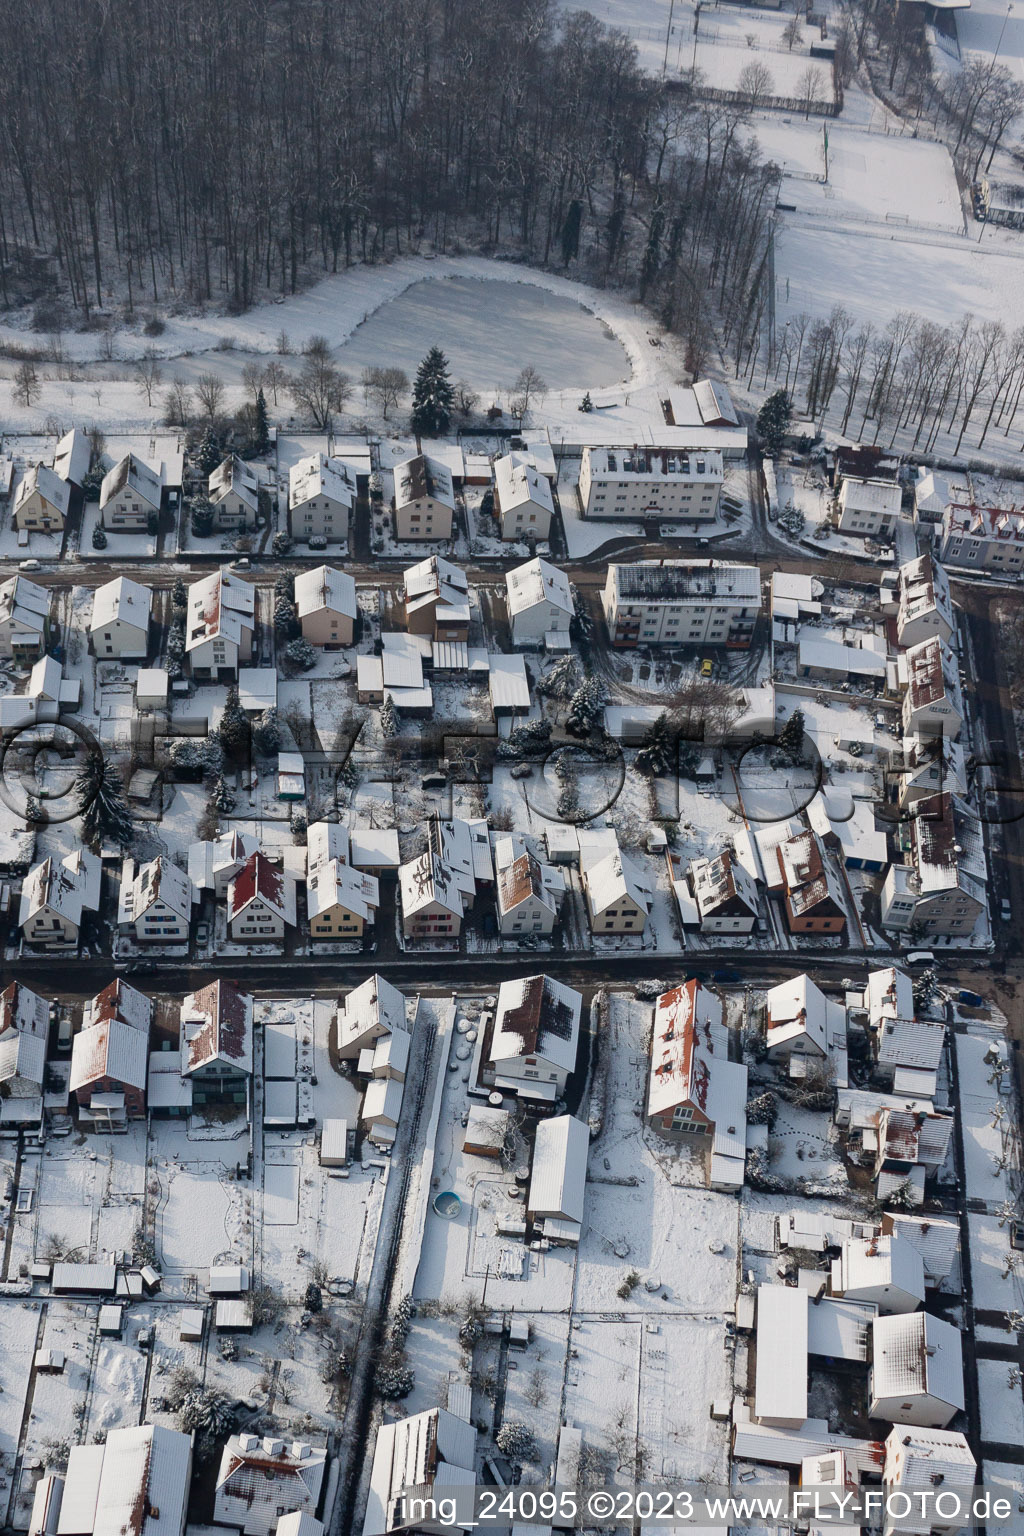 Bird's eye view of Settlement in Kandel in the state Rhineland-Palatinate, Germany